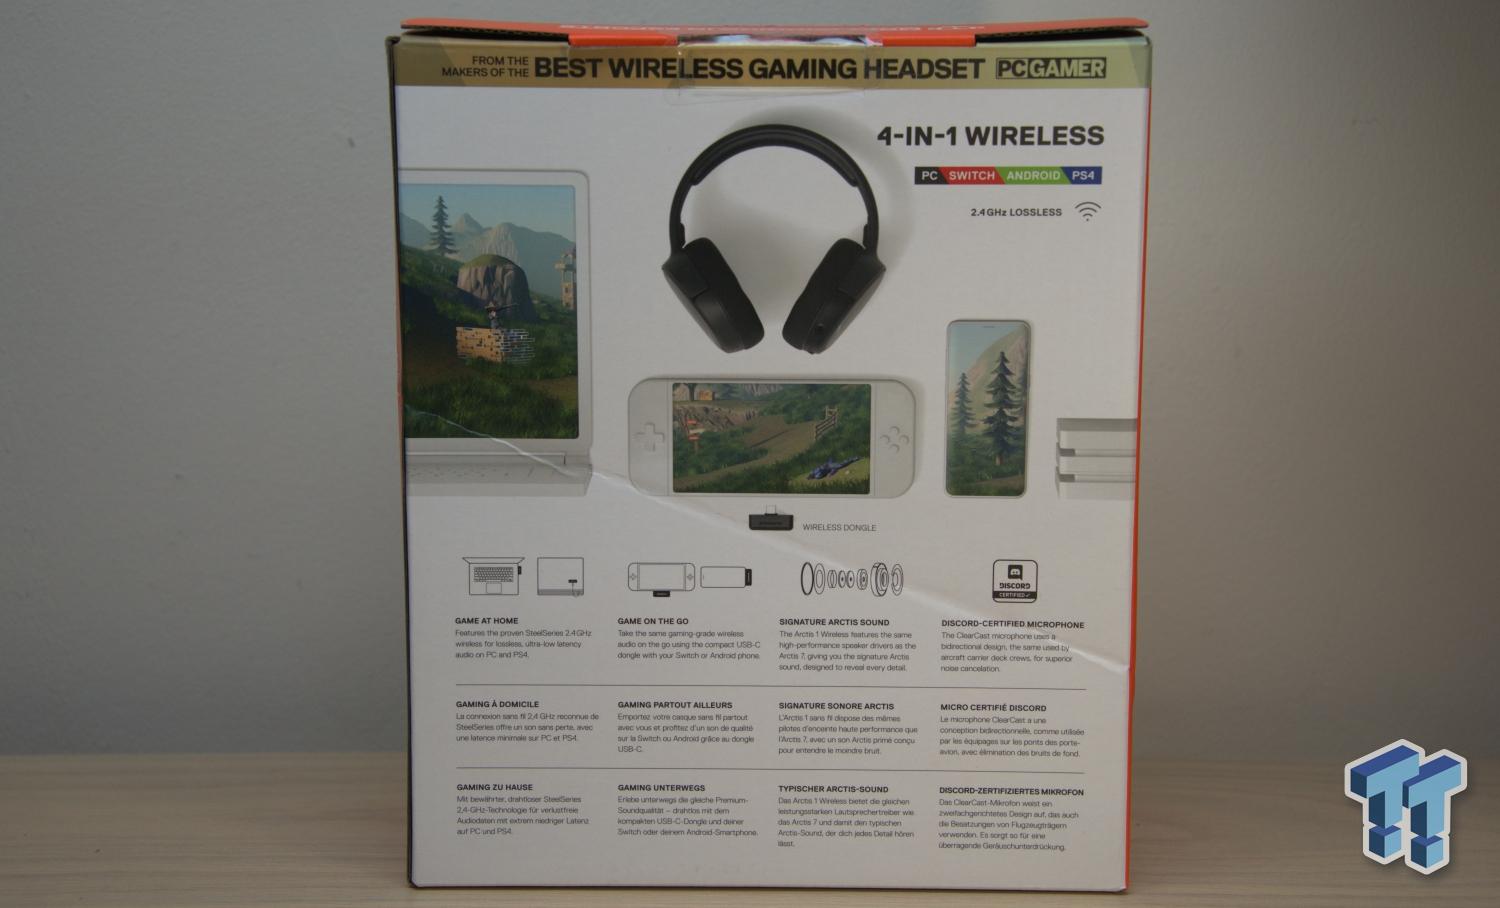 SteelSeries Arctis 1 Wireless Gaming Headset Review